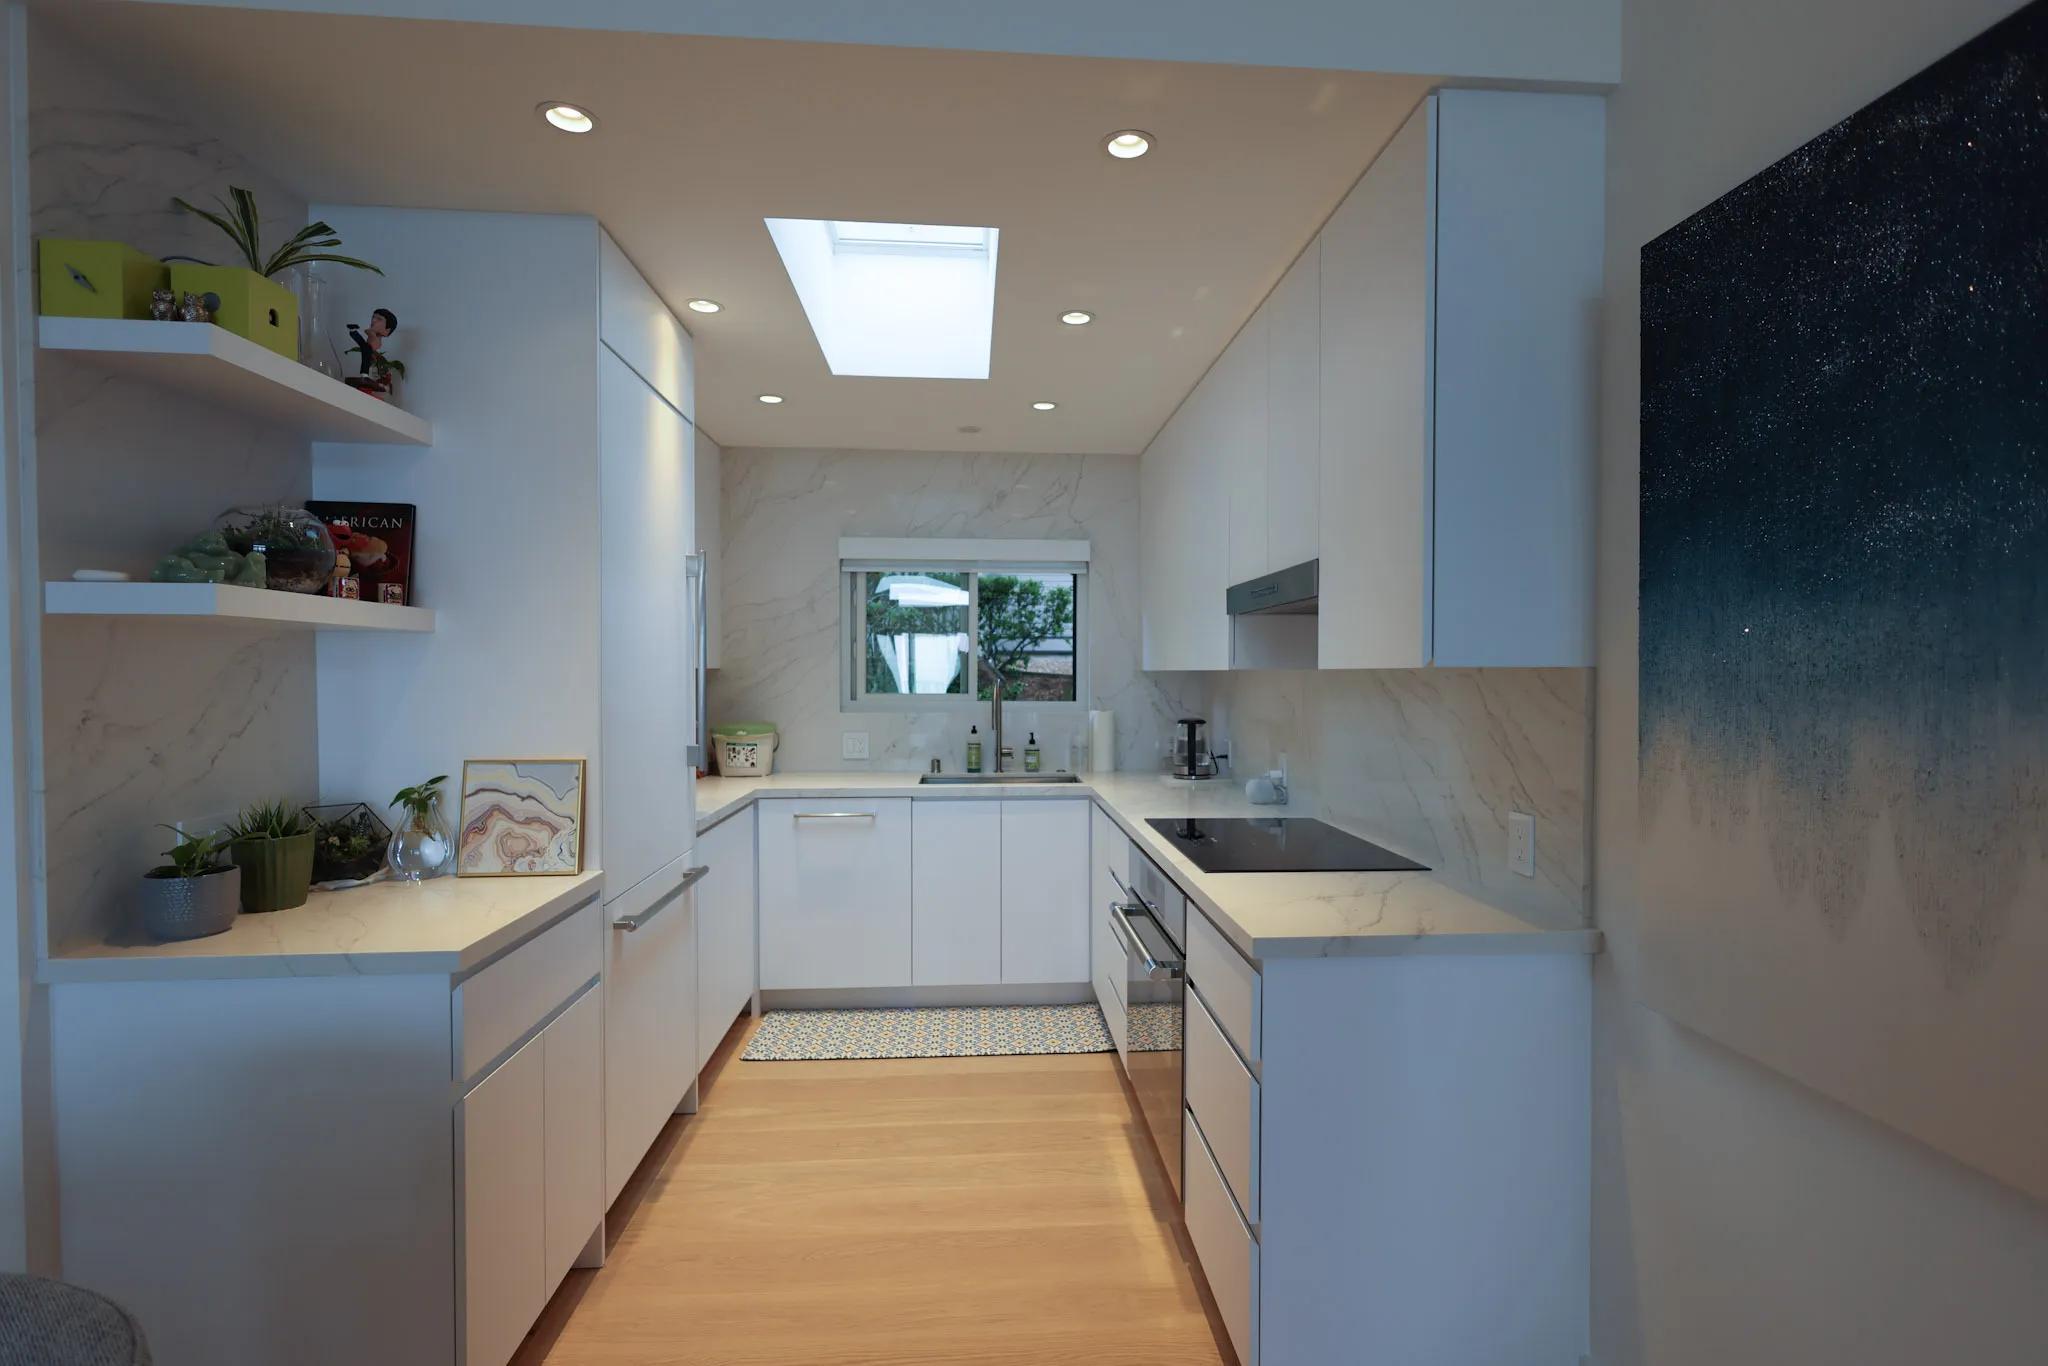 A beautiful kitchen renovation, the result of M Bay Area's care and attention to detail.